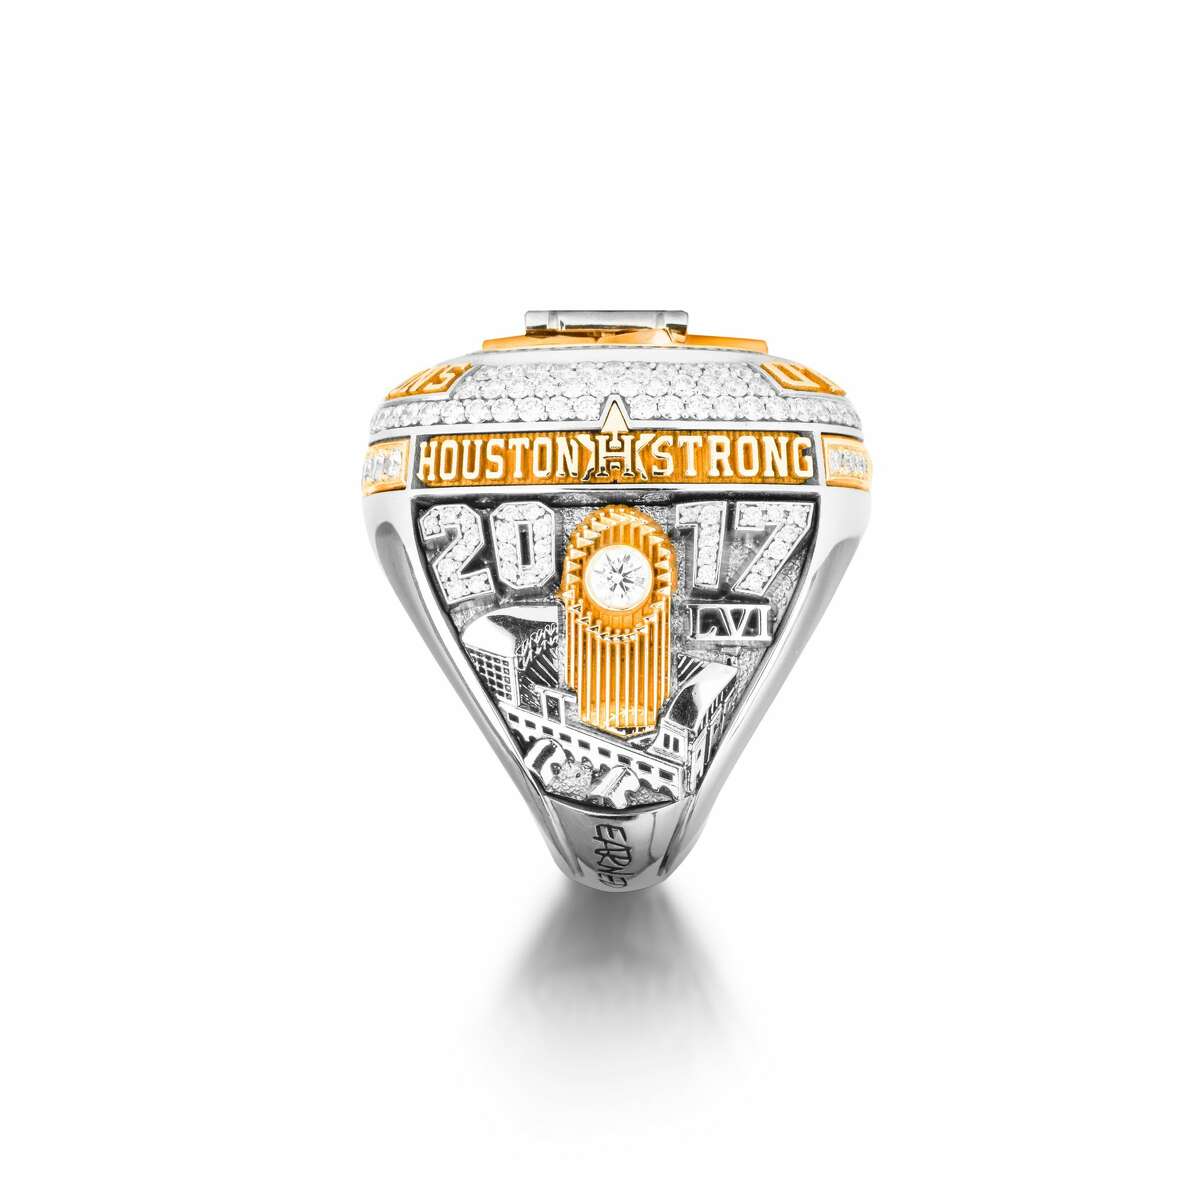 Astros World Series rings have 214 diamonds, 25 sapphires